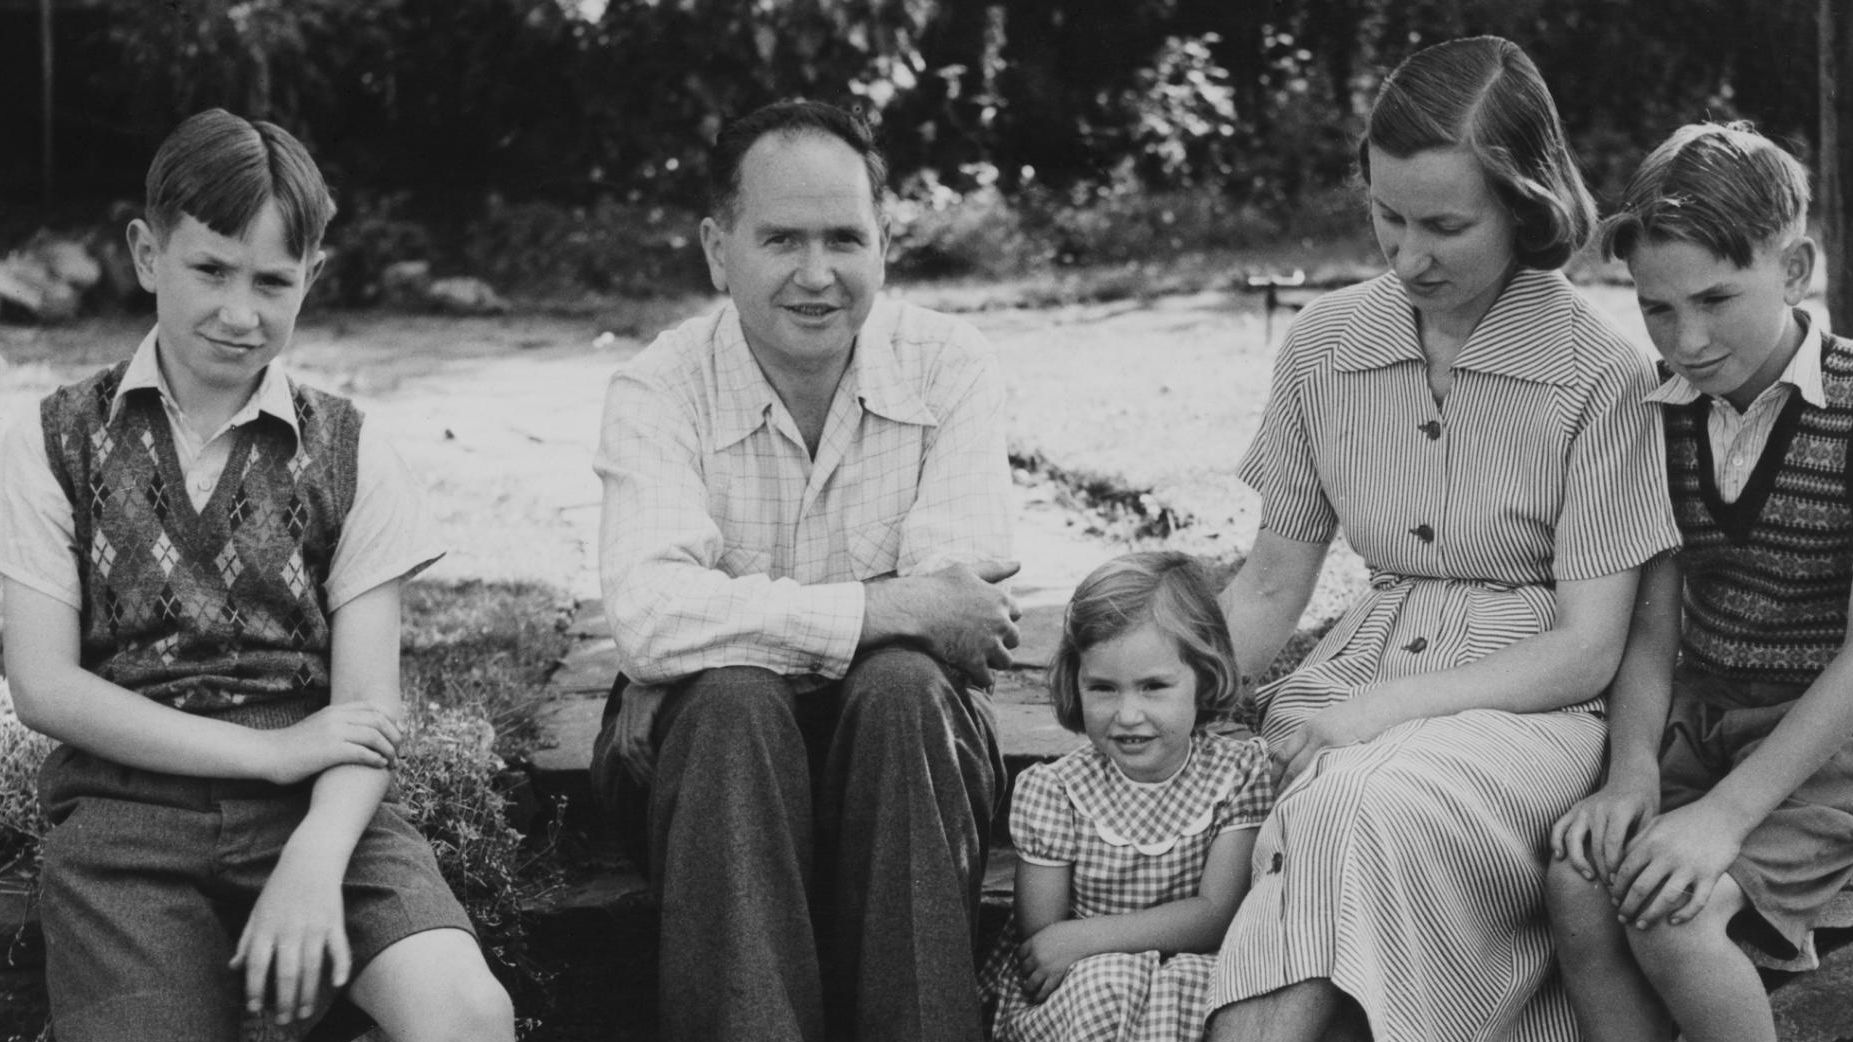 Australian physicist Eric Burhop (center), with his family at their home in Surbiton, London, 22nd July 1951. Burhop's passport was canceled by the British government over plans to travel to the Soviet Union.